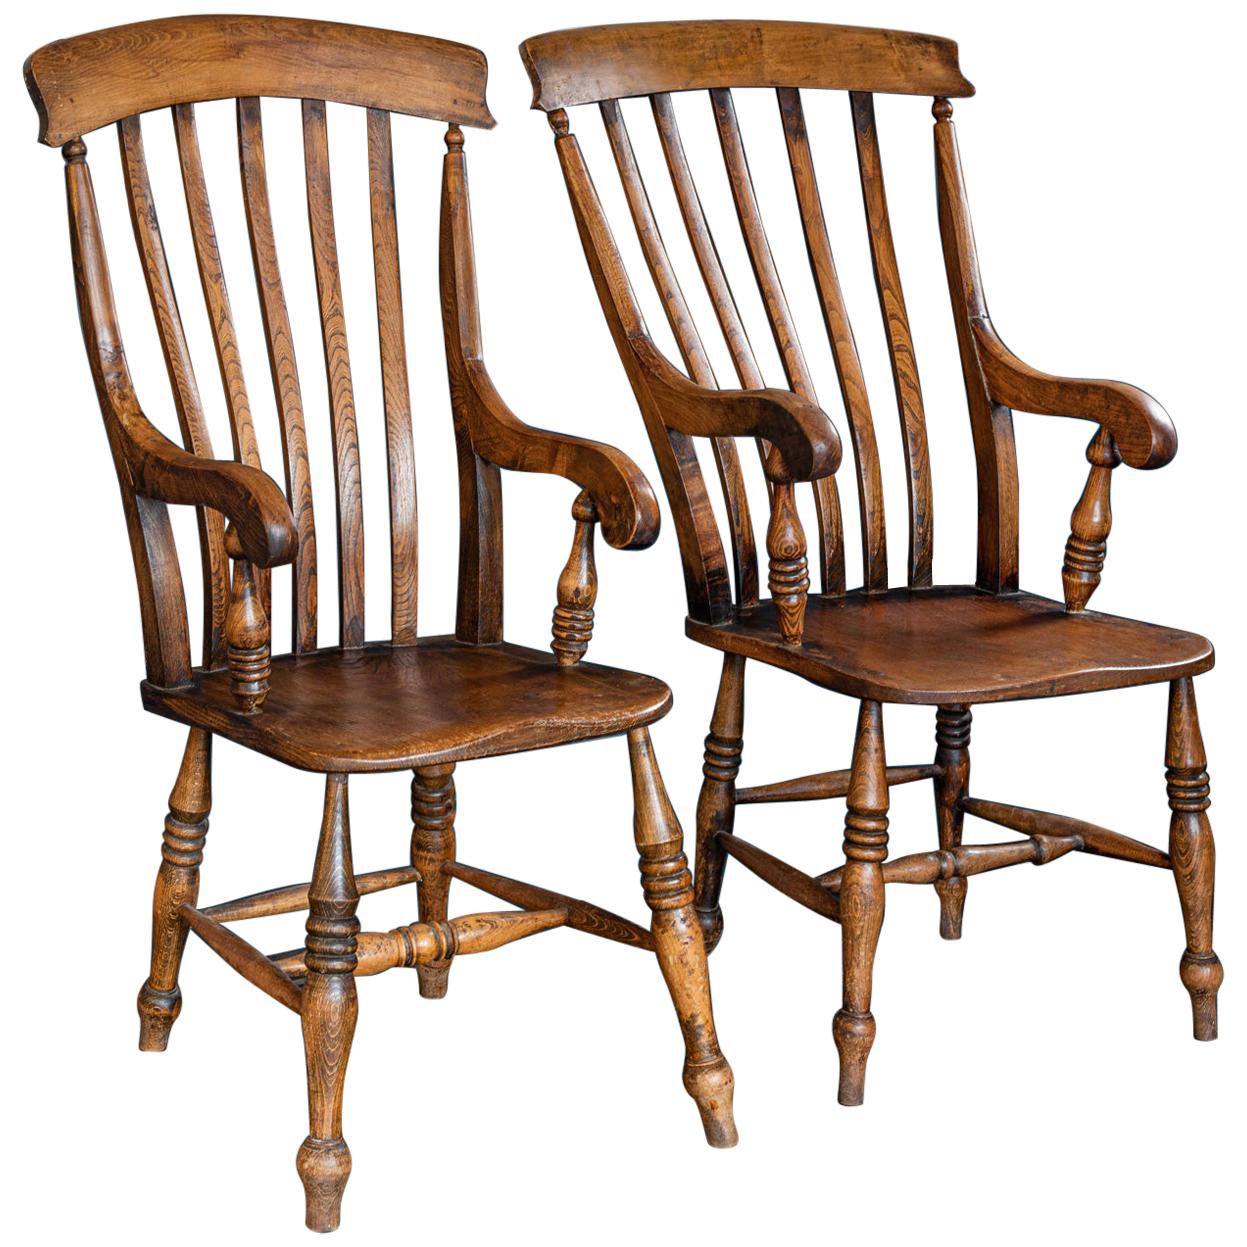 Pair of English Beech and Elm Slat Back Windsor Carver Chairs, Late 19th Century